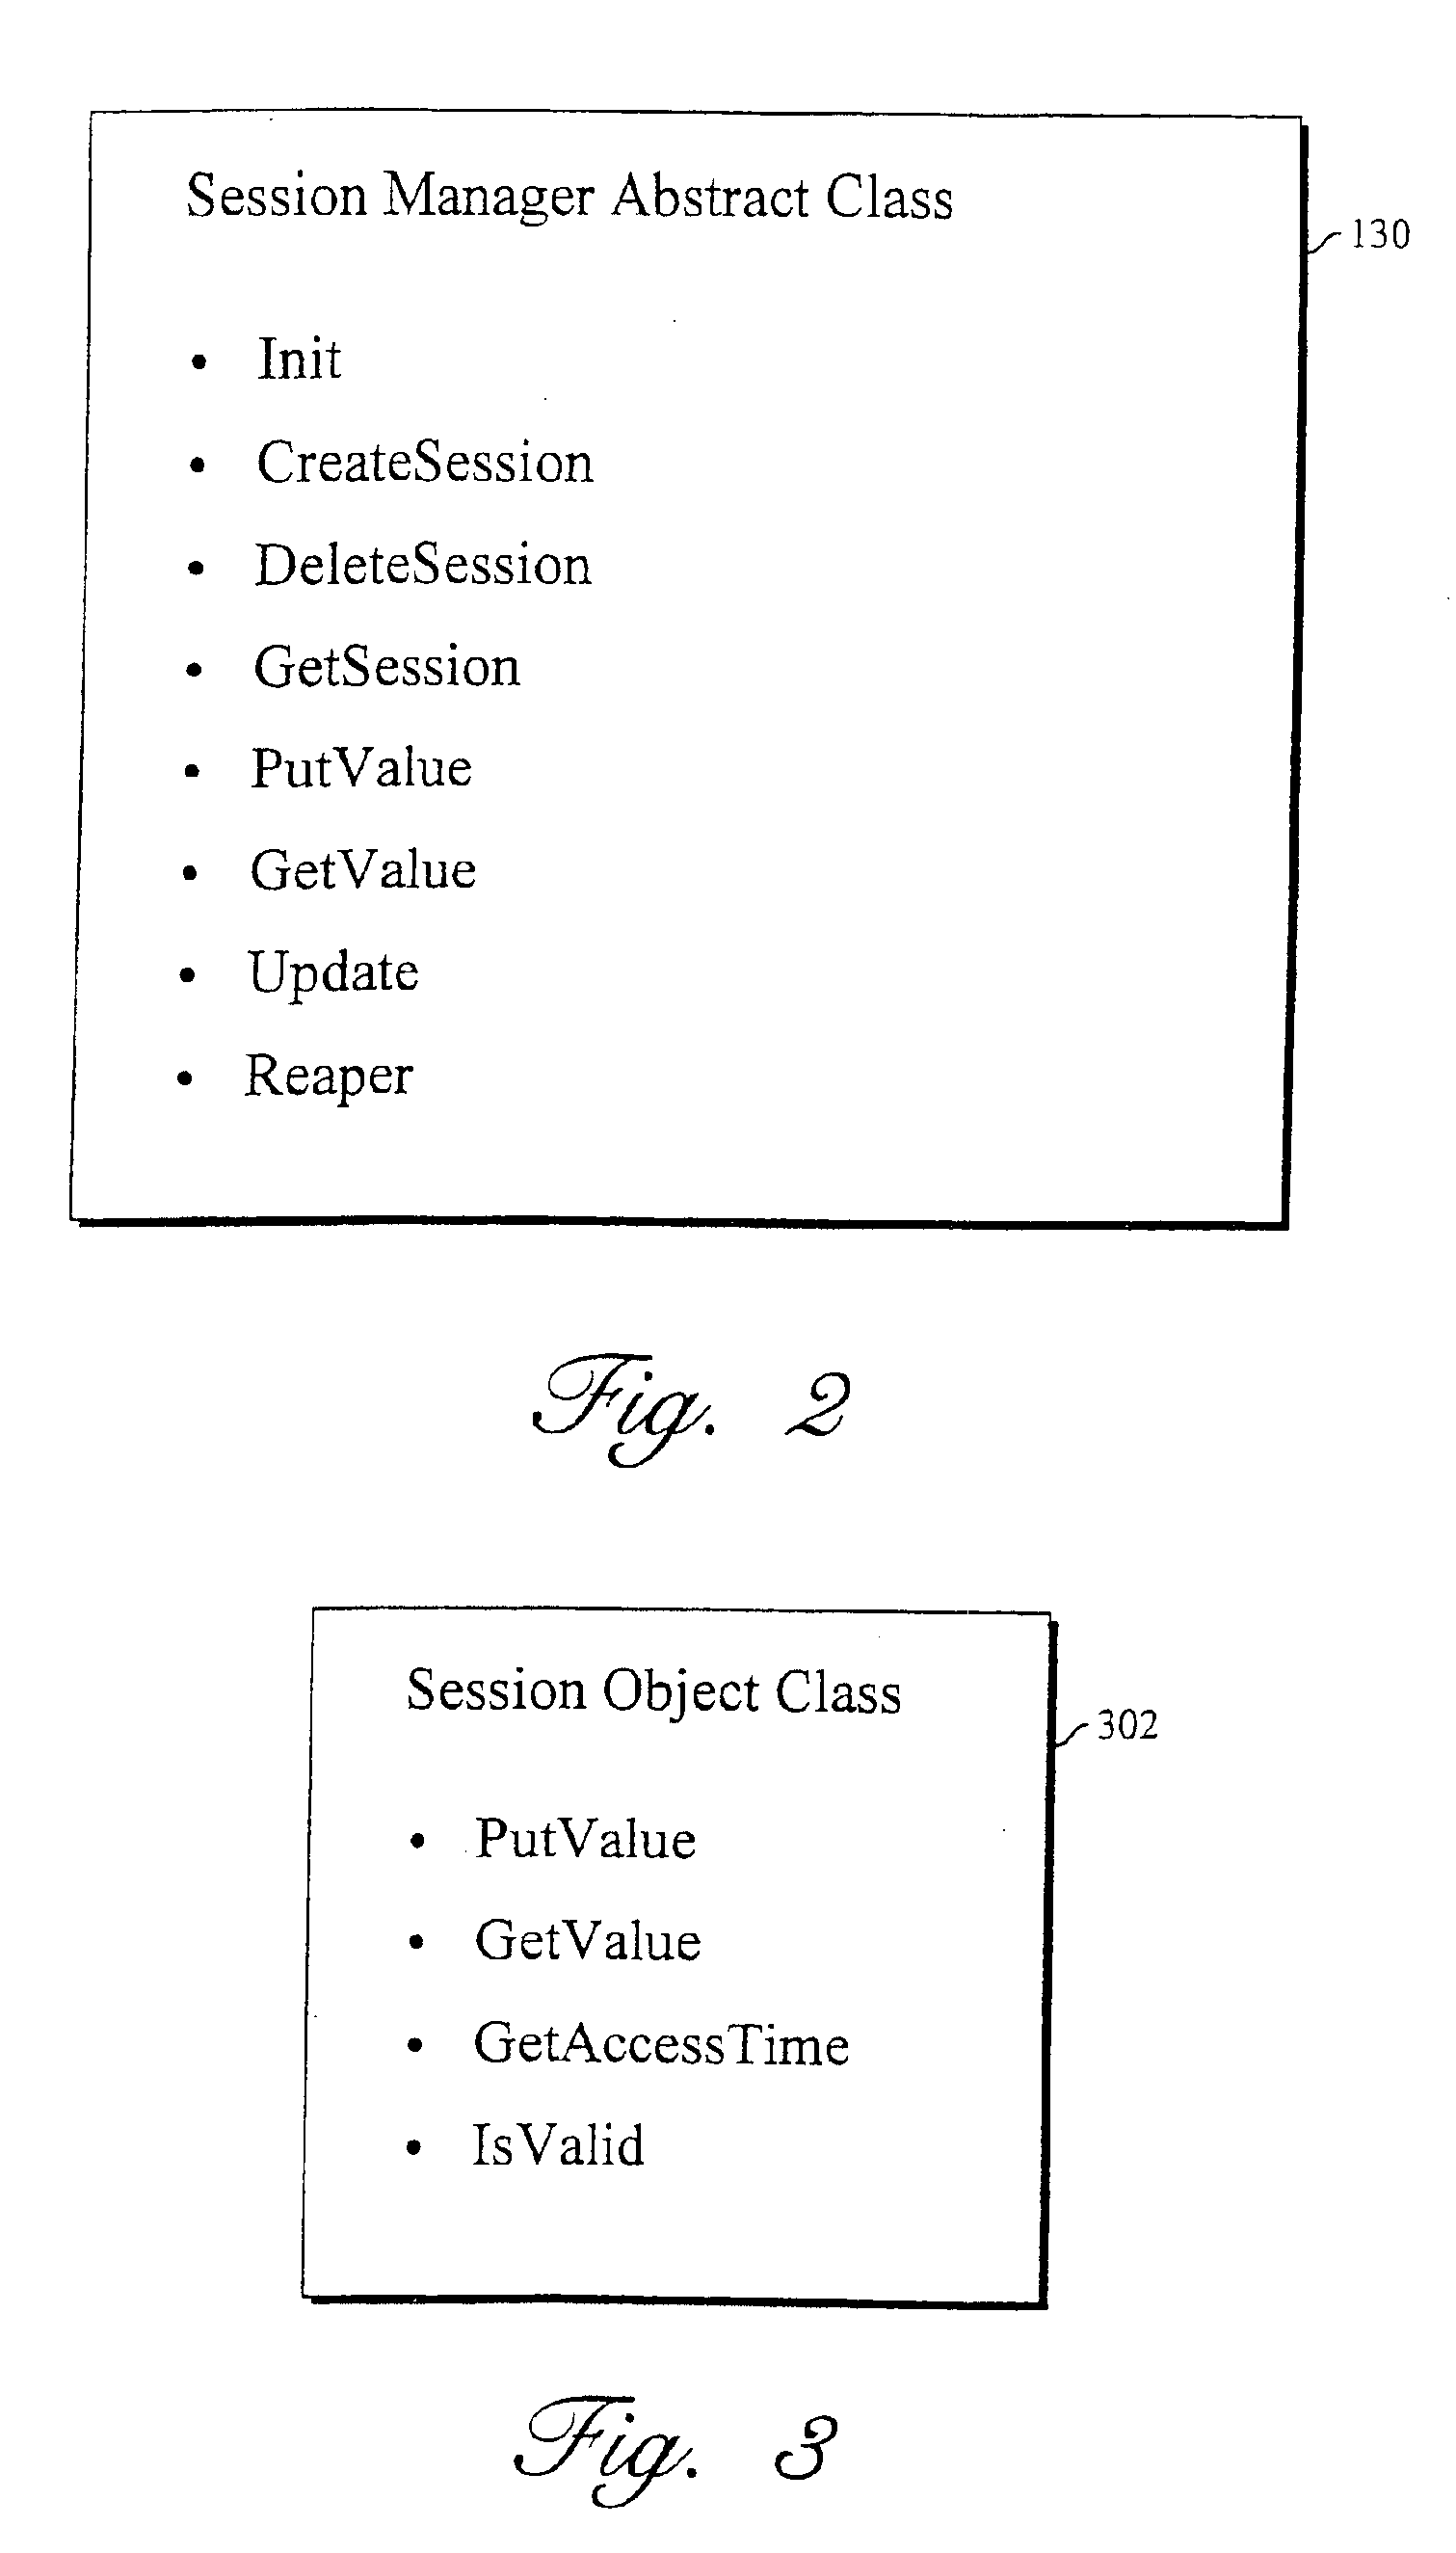 Mechanism for enabling customized session managers to interact with a network server